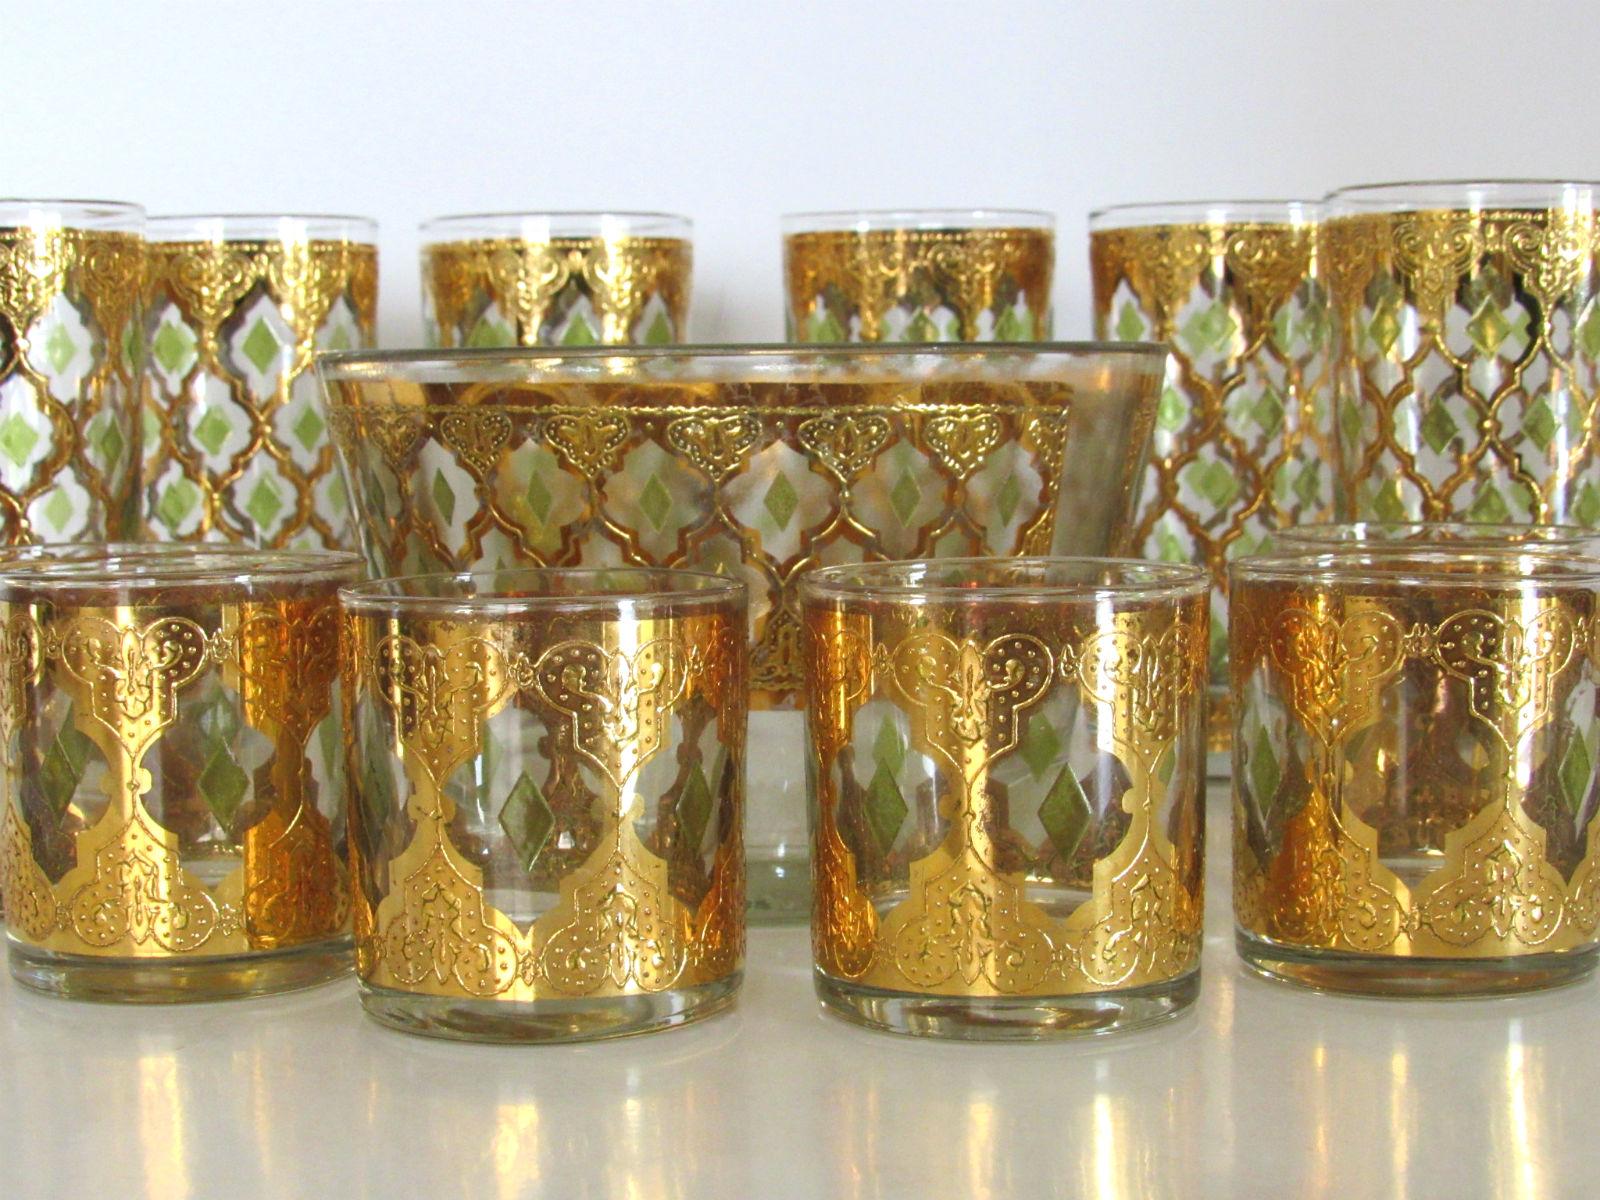 Exquisite set of six highball glasses, 6 shot gasses and ice bucket by Culver, circa 1962. This set has a highly ornate 22 Karat gold textured filigree design with raised green diamond accents. Highball glasses in excellent condition, some very